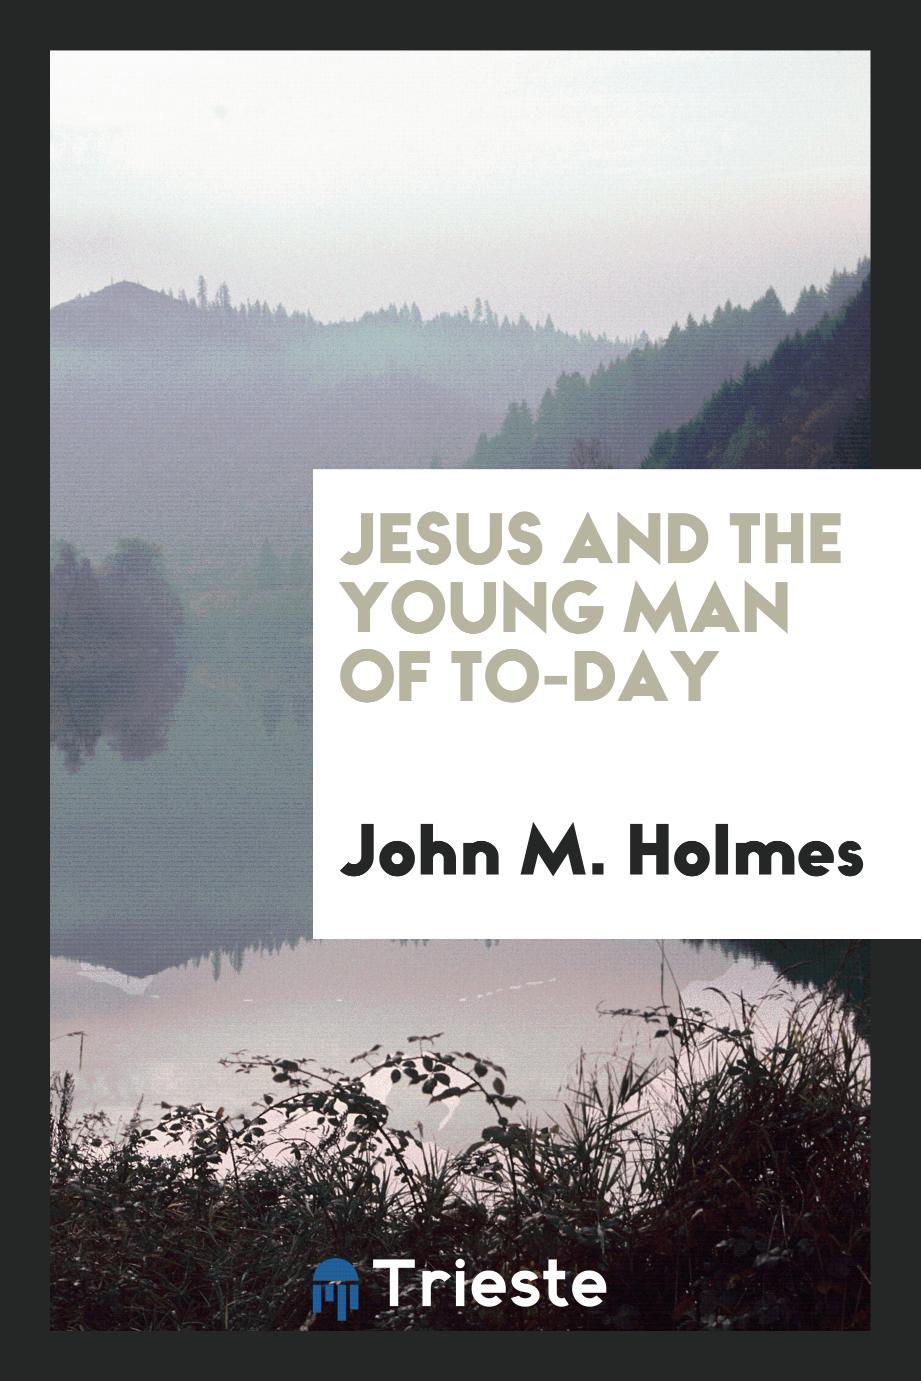 Jesus and the young man of To-day